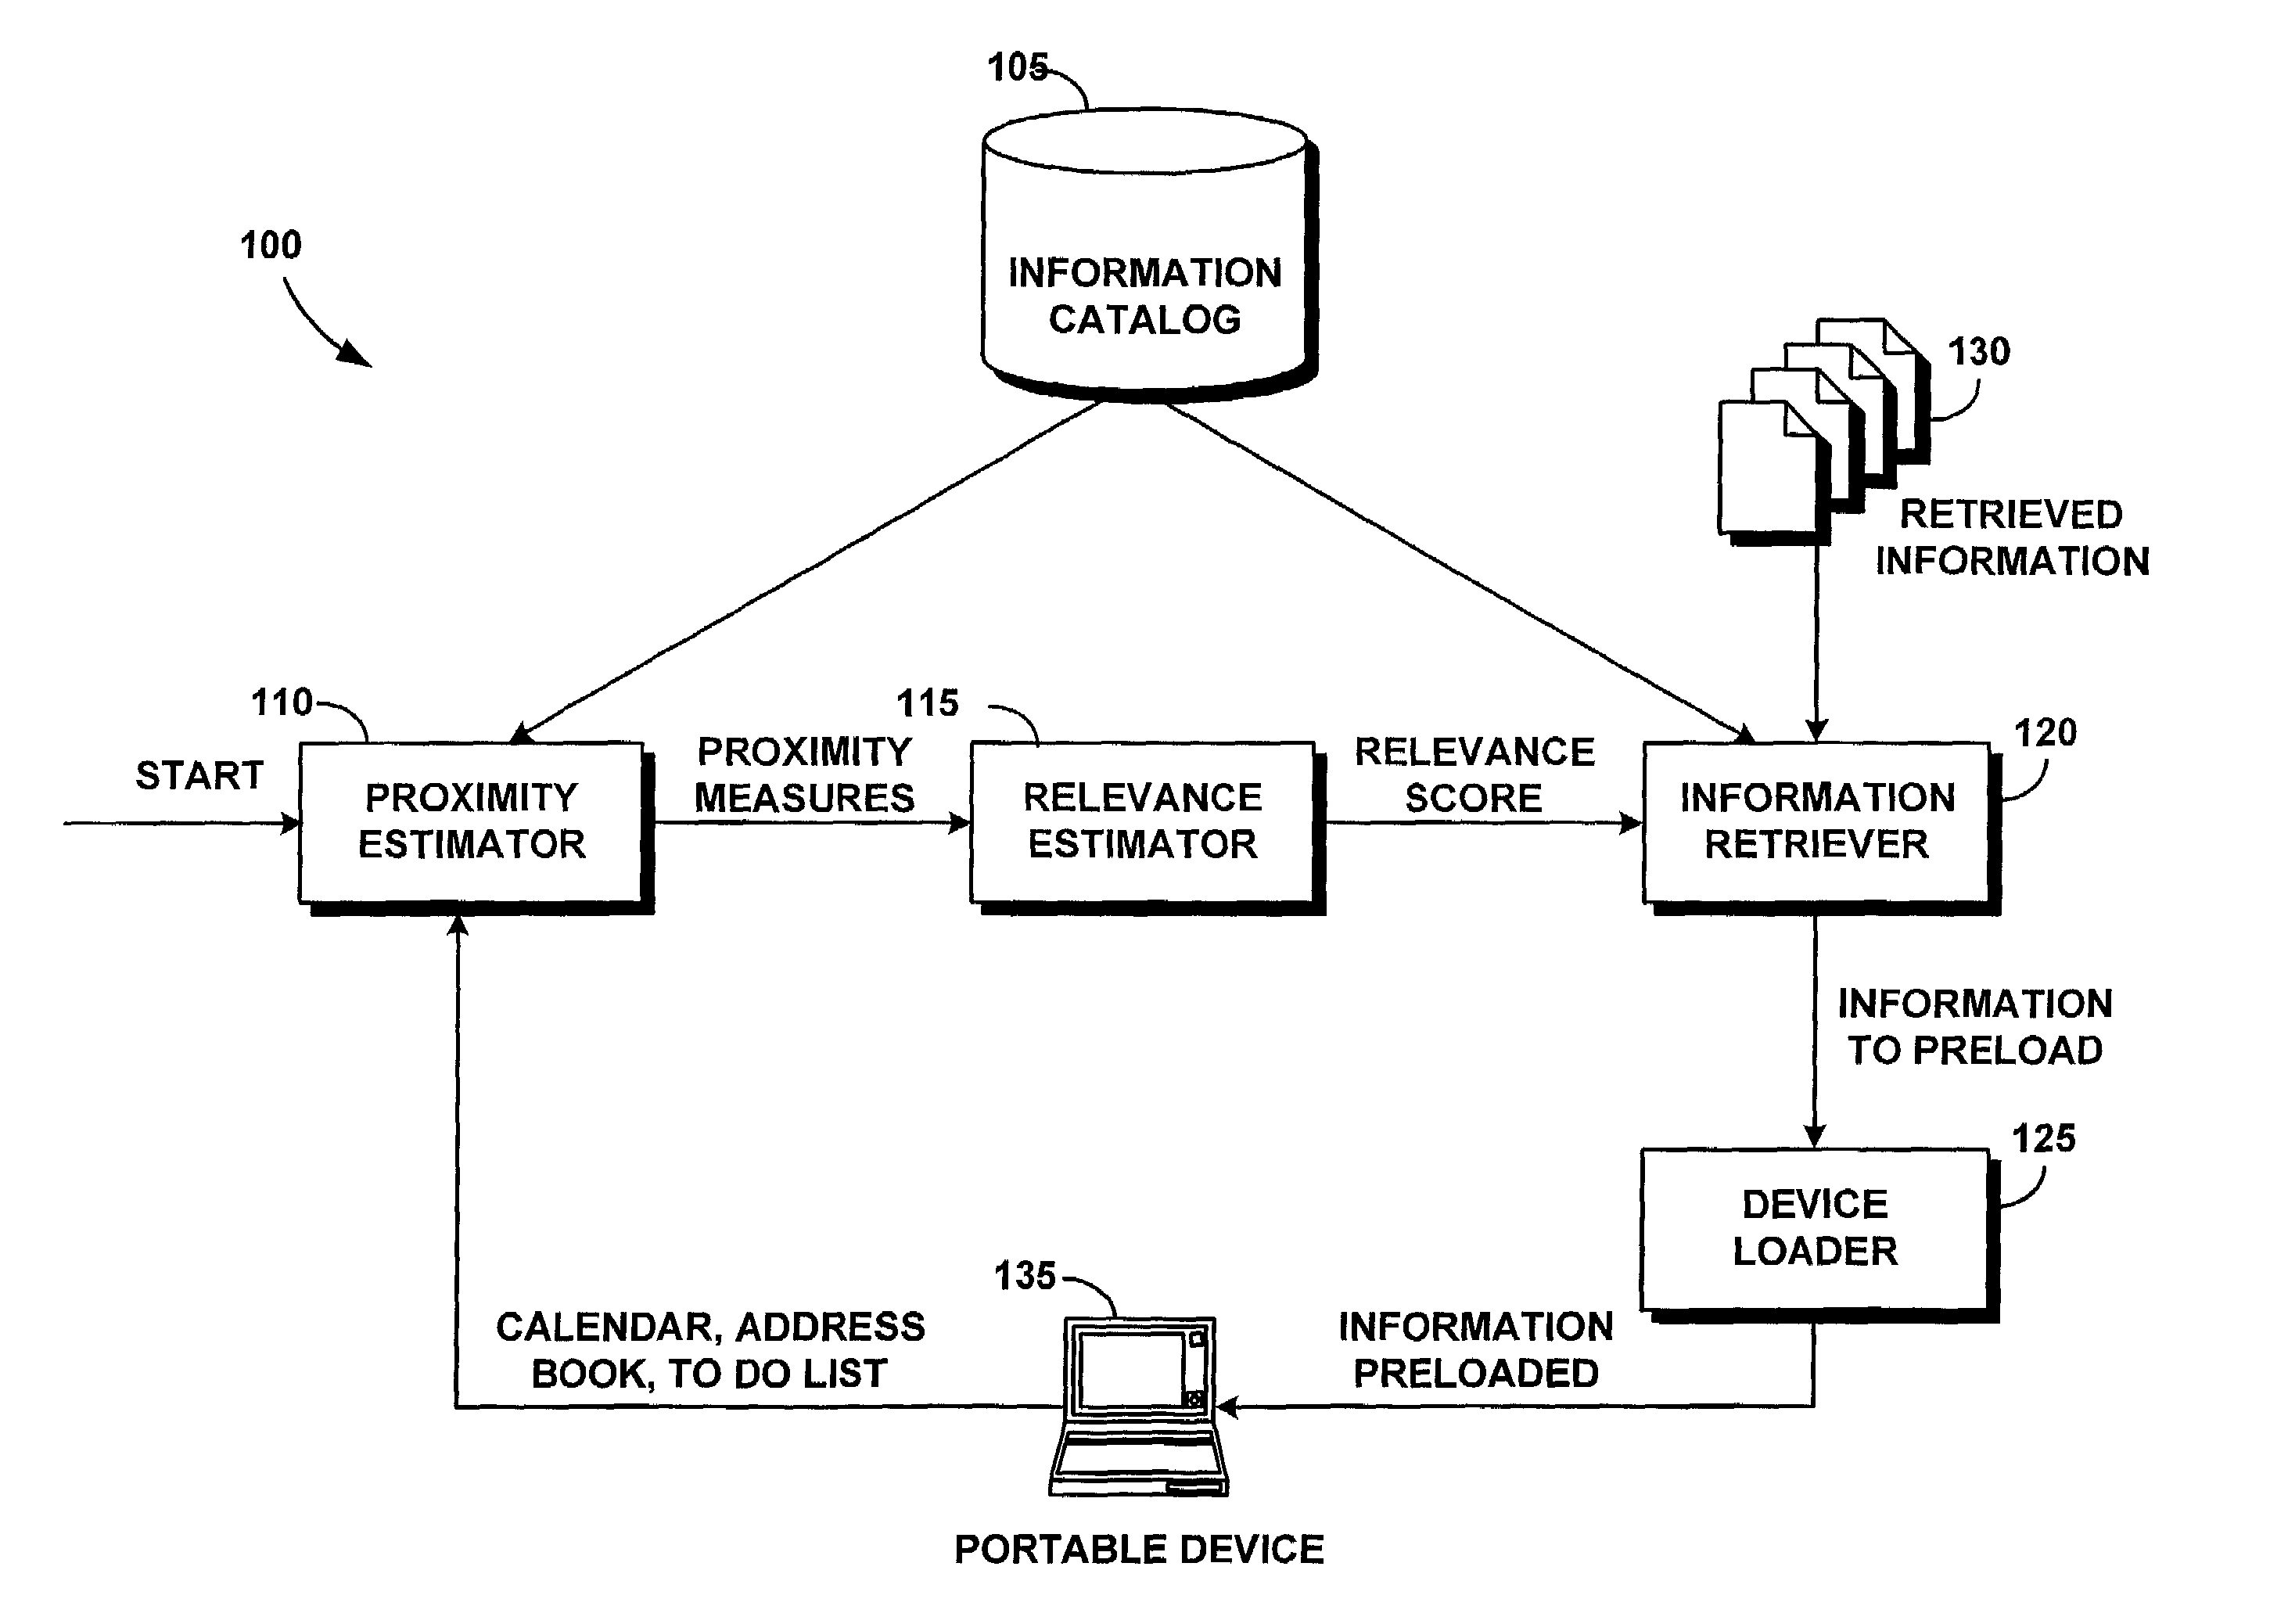 Automatic relevance-based preloading of relevant information in portable devices